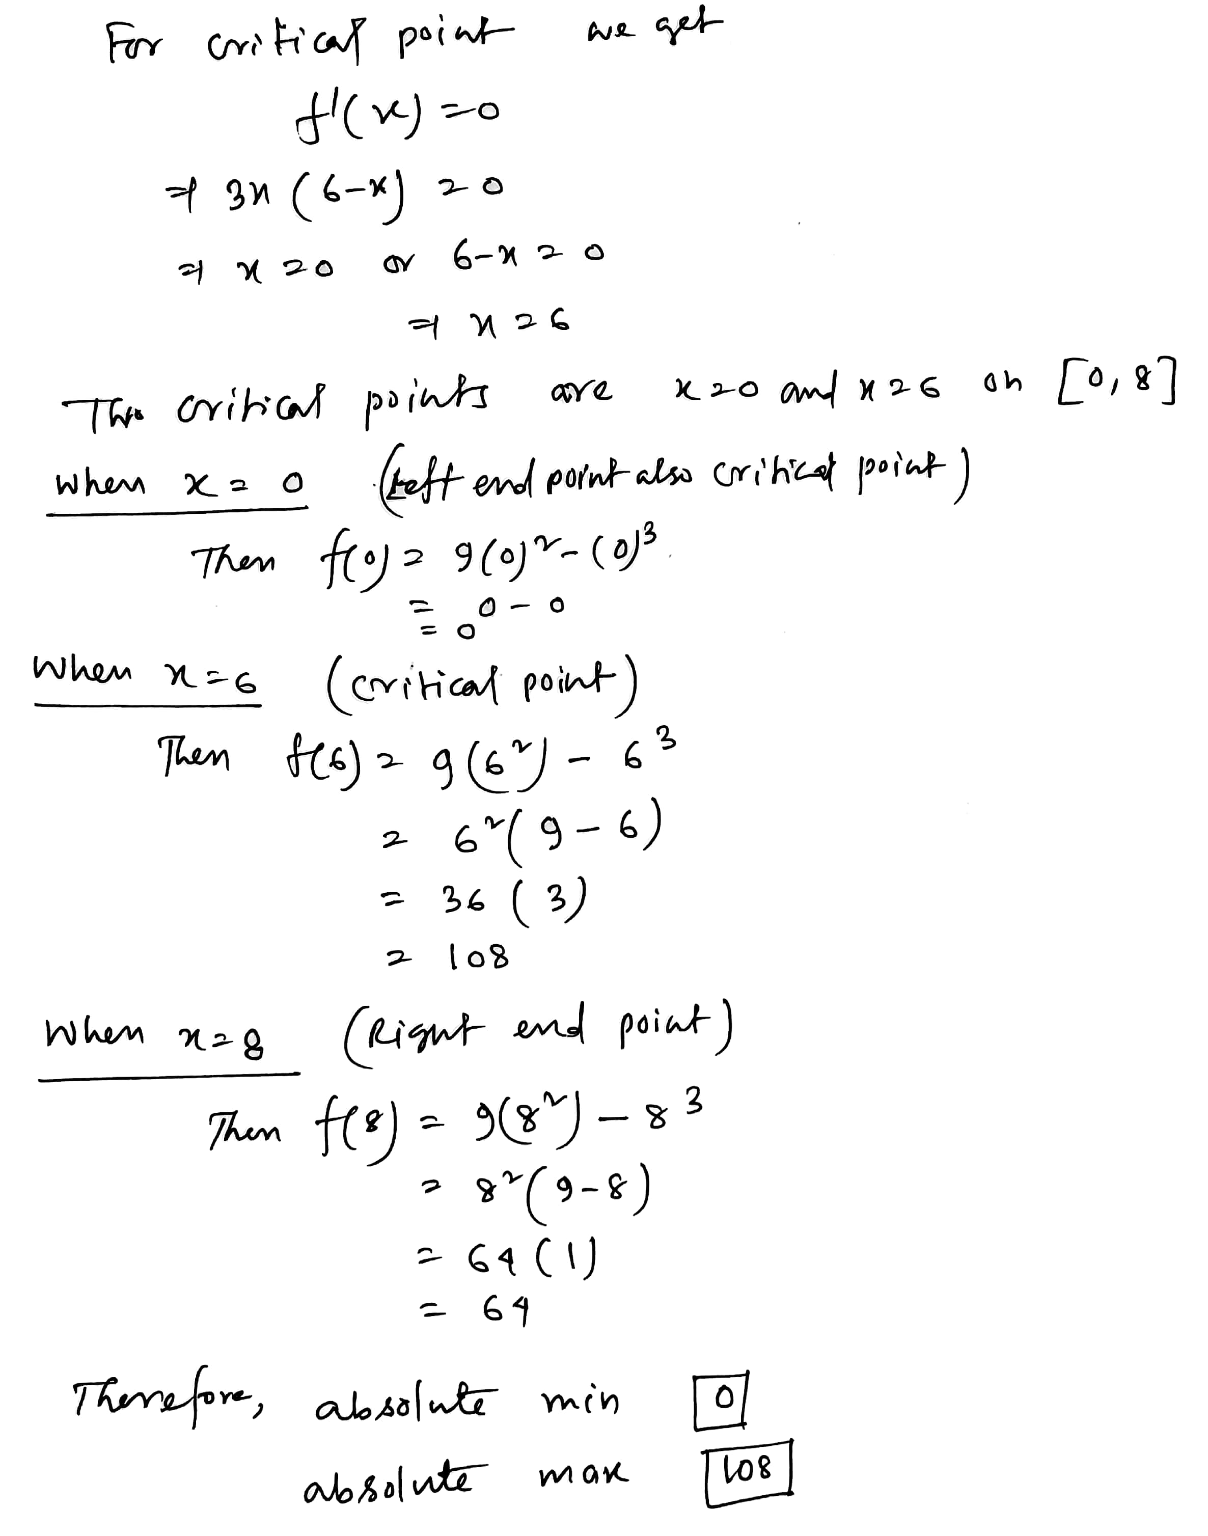 Find (without using a calculator) the absolute extreme values of the function on the given interval. f(x) = x3 - 9x2 + 15x + 4 on (-1,2] absolute min absolute max Need Help? Read Watch Talk to a Tutor 2. -/10 POINTS BERRAPCALC73.3.011. Find (without using a calculator) the absolute extreme values of the function on the given interval. f(x) = 9x2 - x3 on O, 8] absolute min absolute max Need Help? Read It Watch It Talk to a Tutor